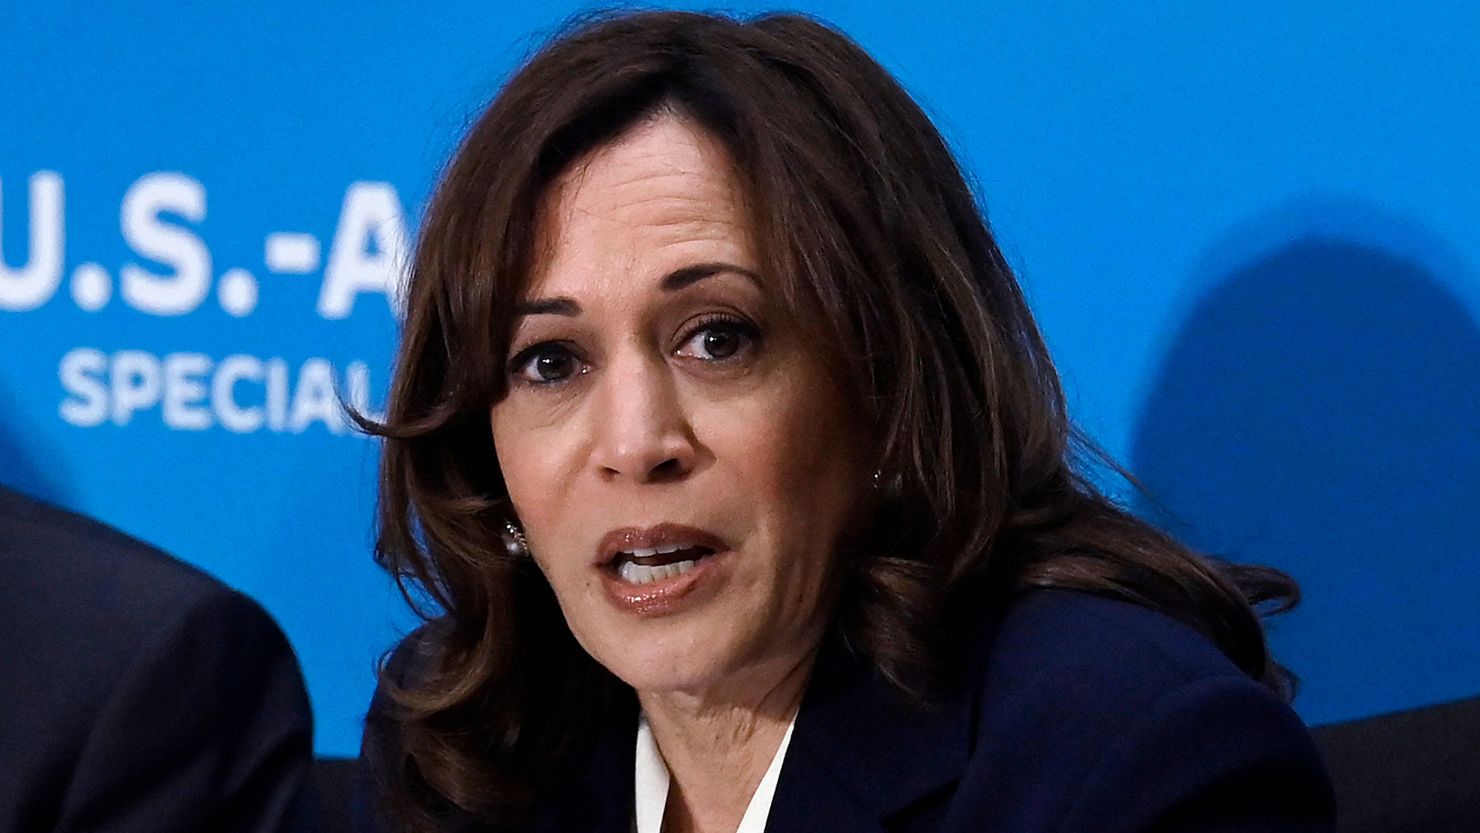 Harris will gather experts to focus on wider ramifications of the